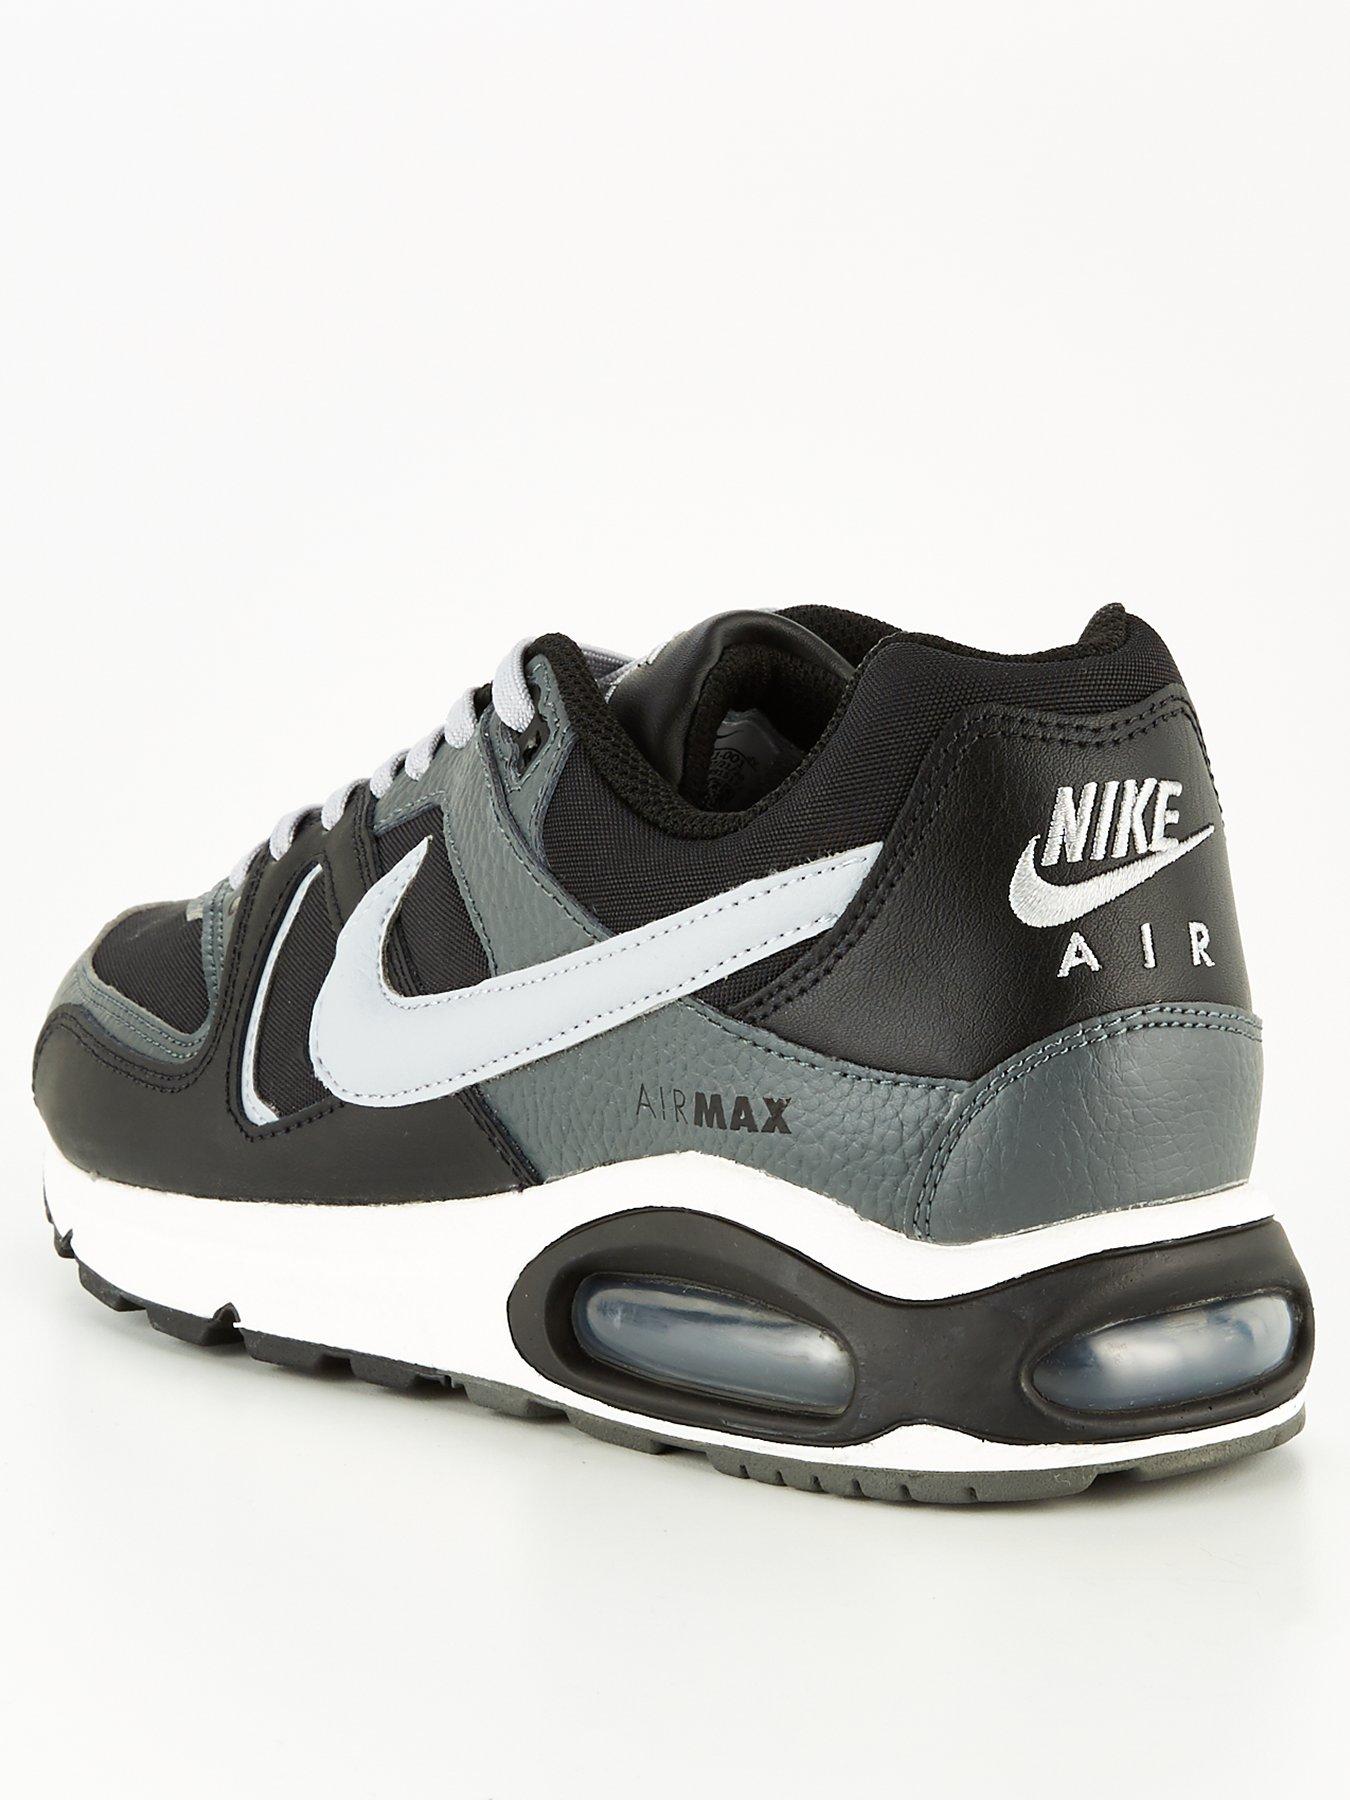 nike air max command leather black